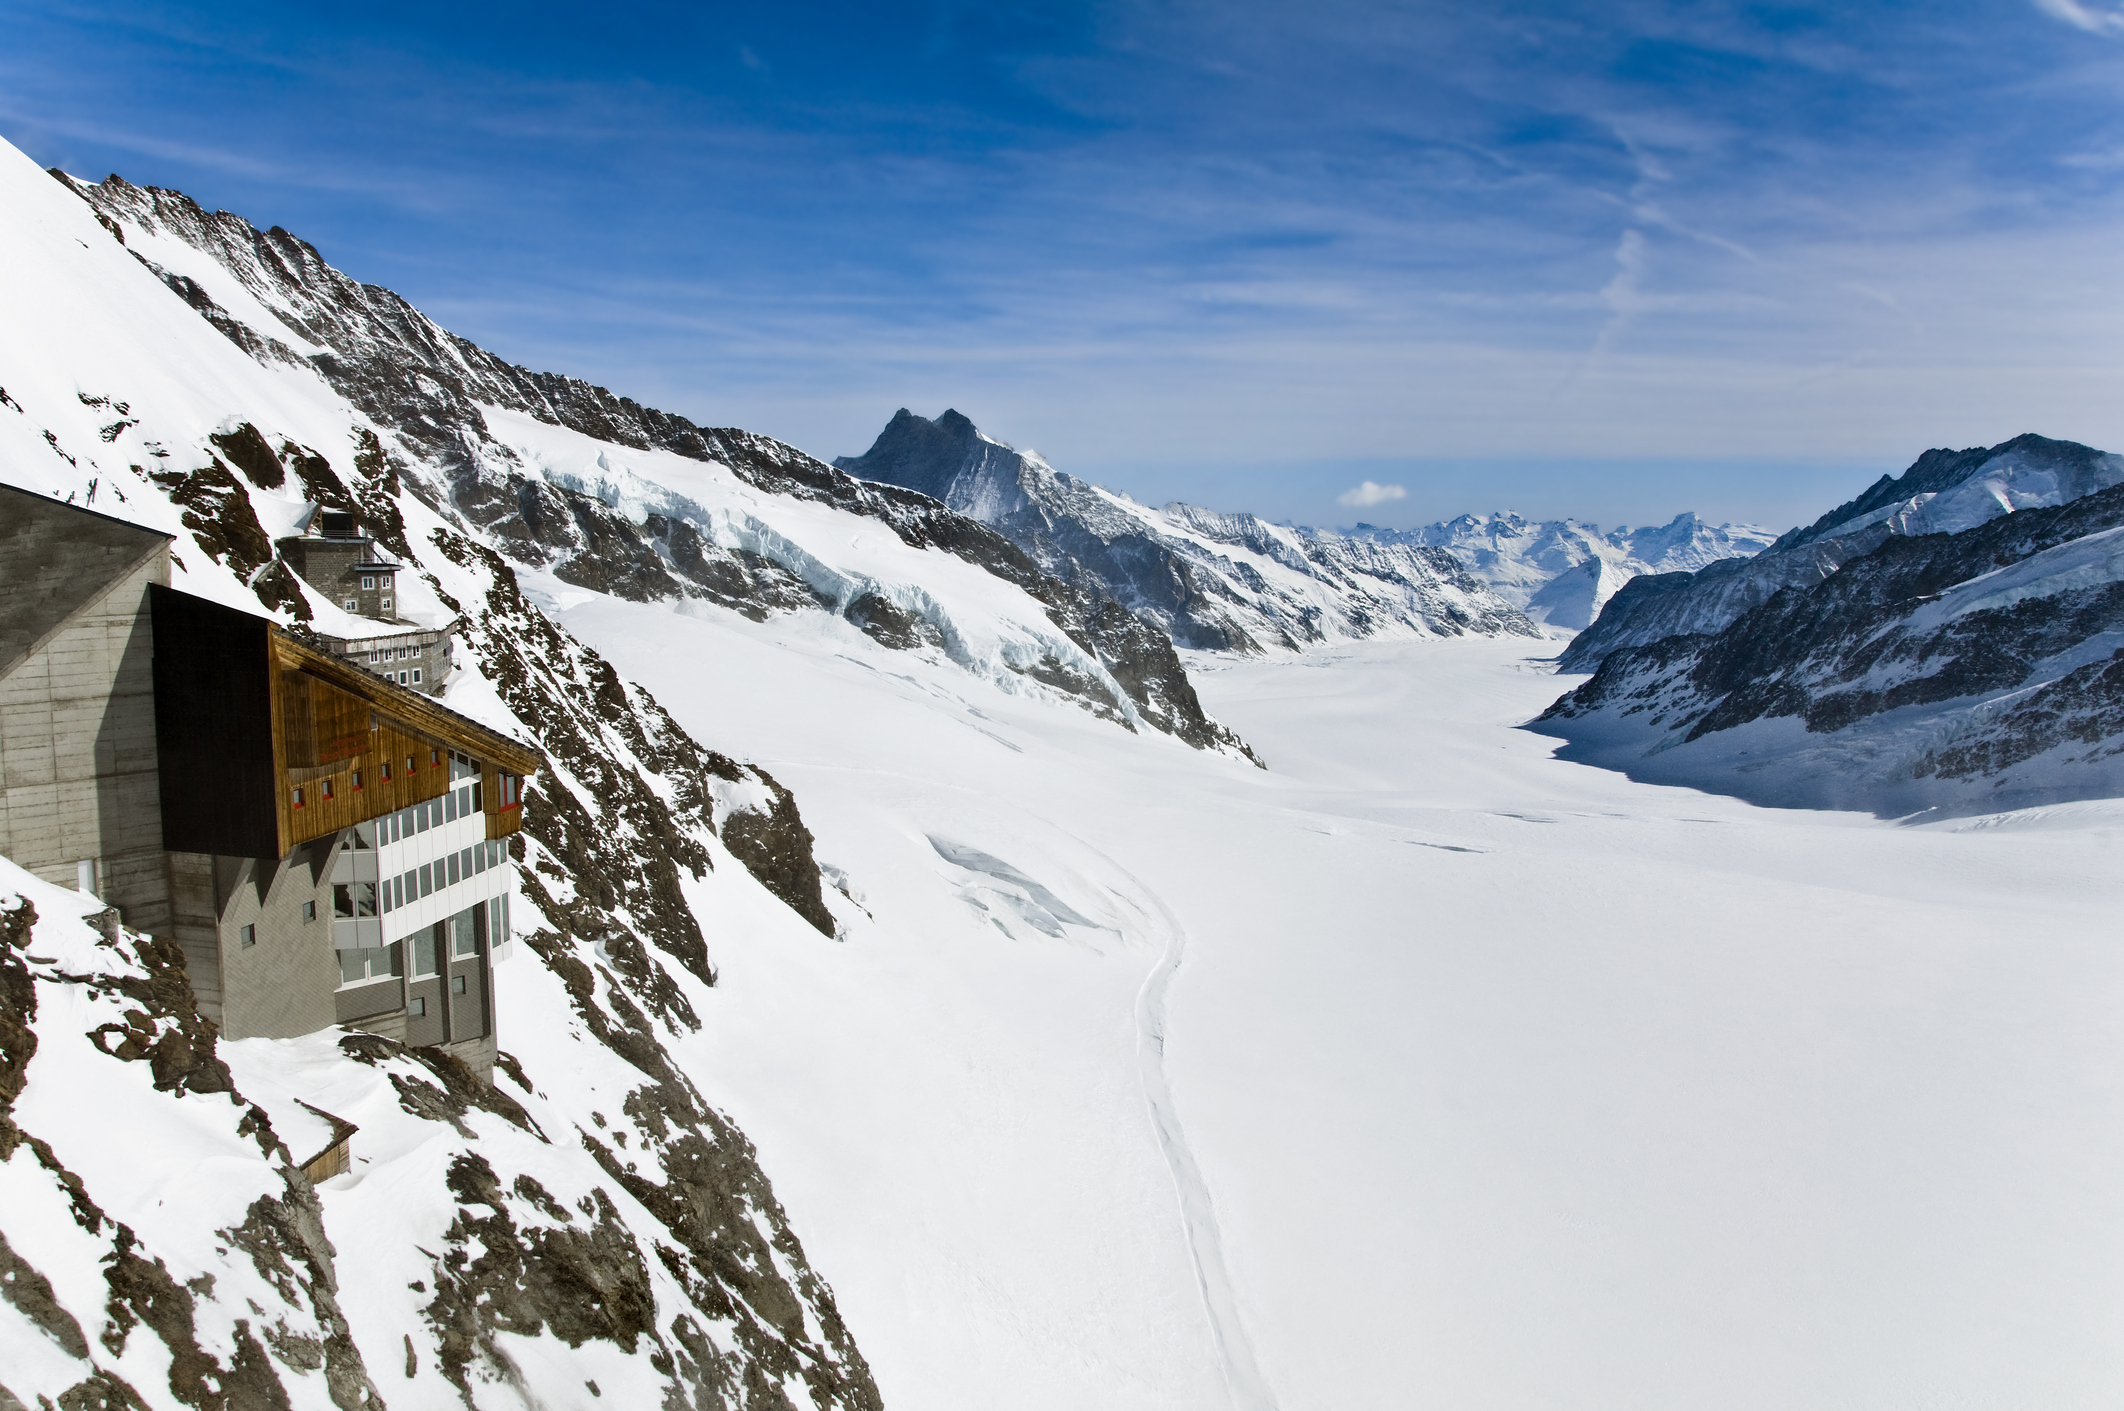 View from the Jungfraujoch